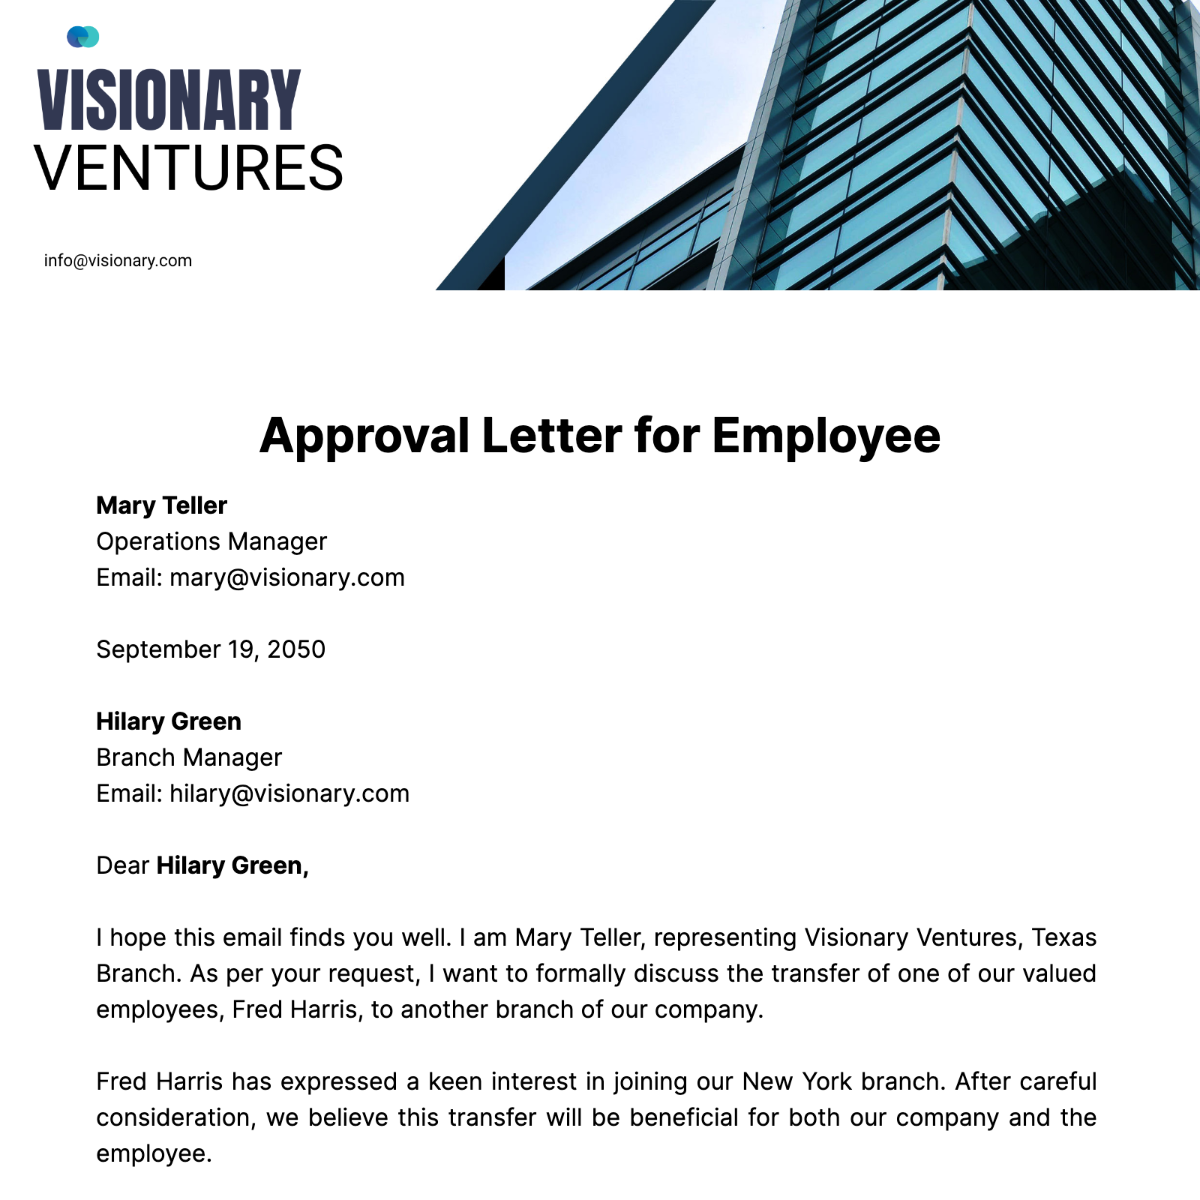 Approval Letter for Employee  Template